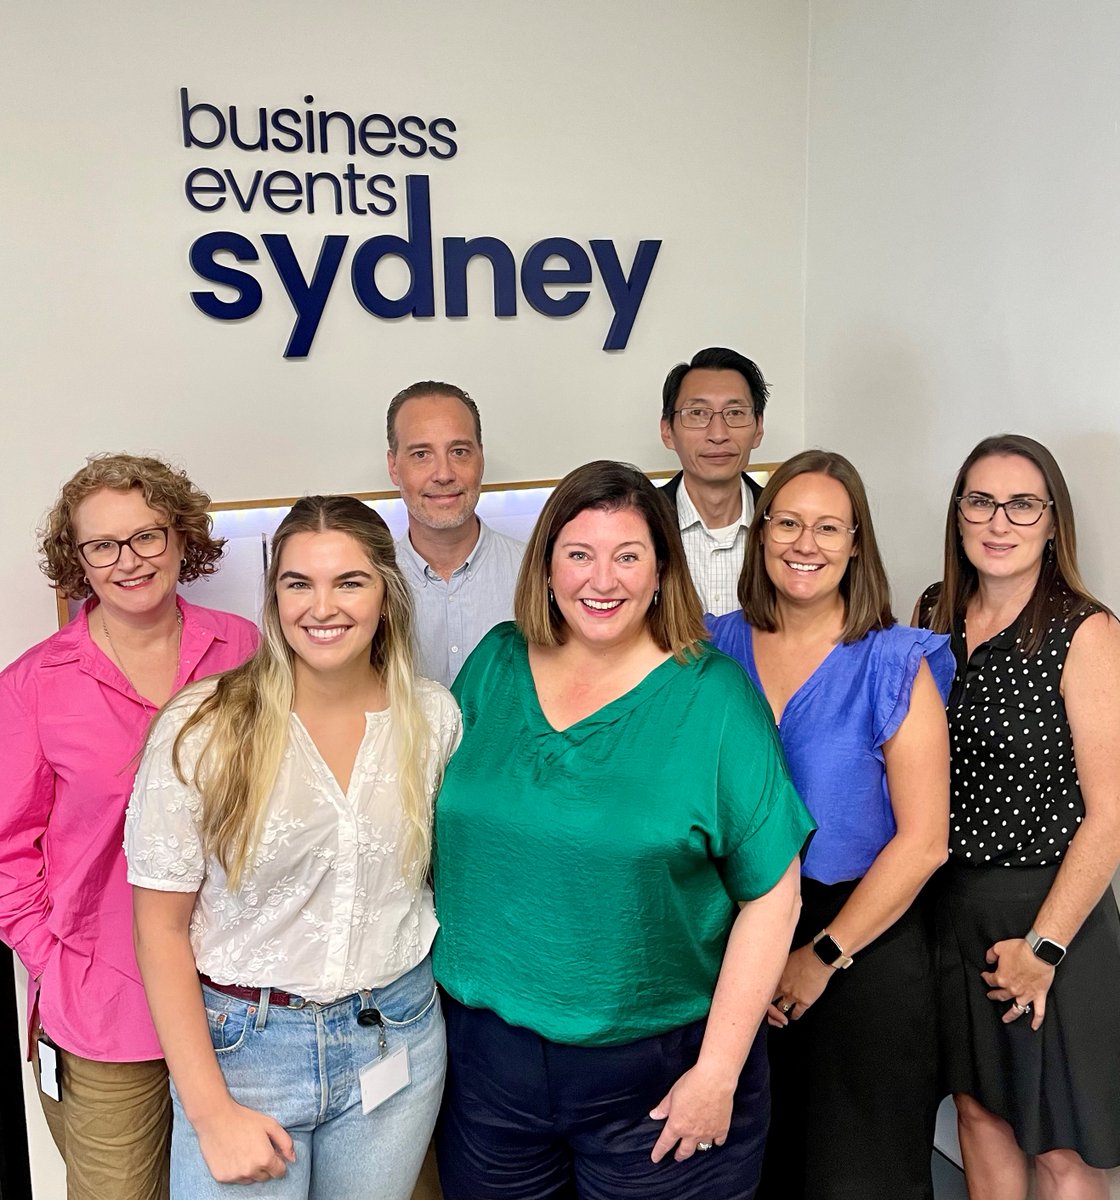 @BESydney is pleased to welcome Tania Barnes to the #Association team as a Senior Client Engagement Manager responsible for progressing pipeline opportunities in the #Technology & #ProfessionalServices sector stream. #teamSydney #meetinSydney, #changestartshere